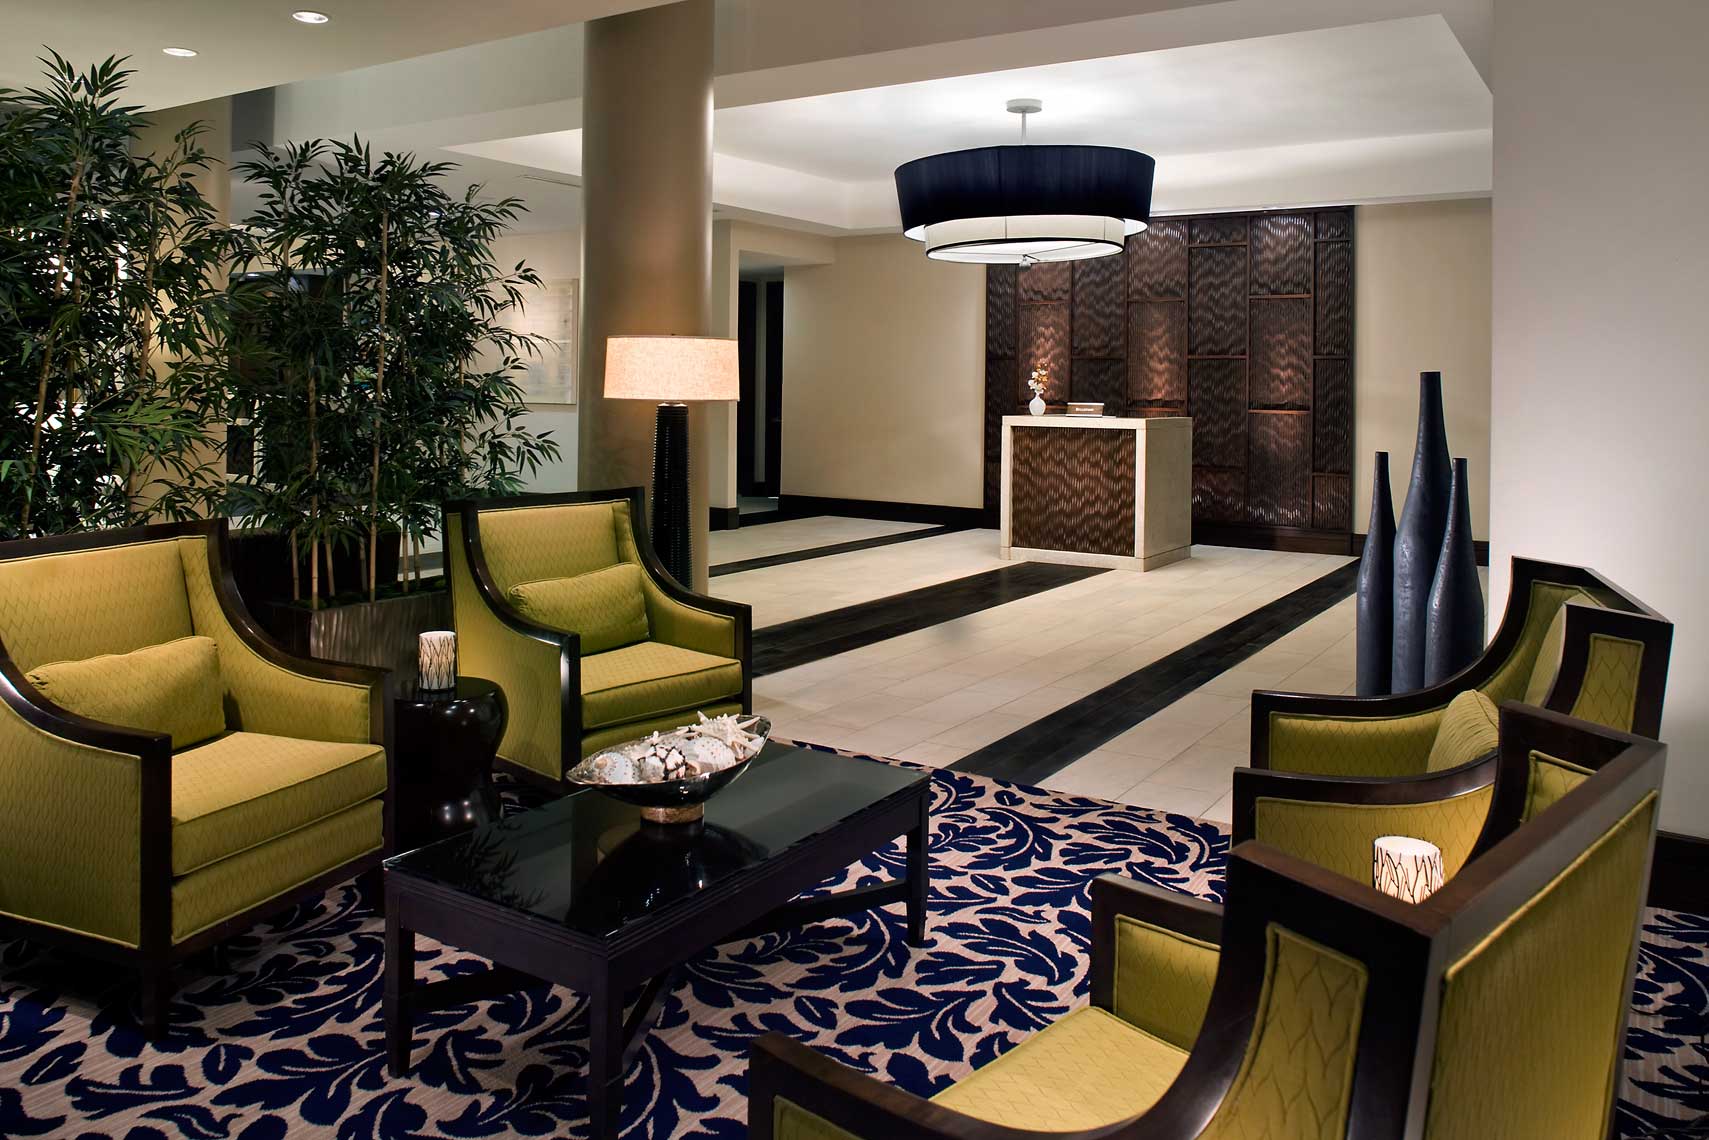 A view of the seating and concierge desk at the InterContinental West Shore